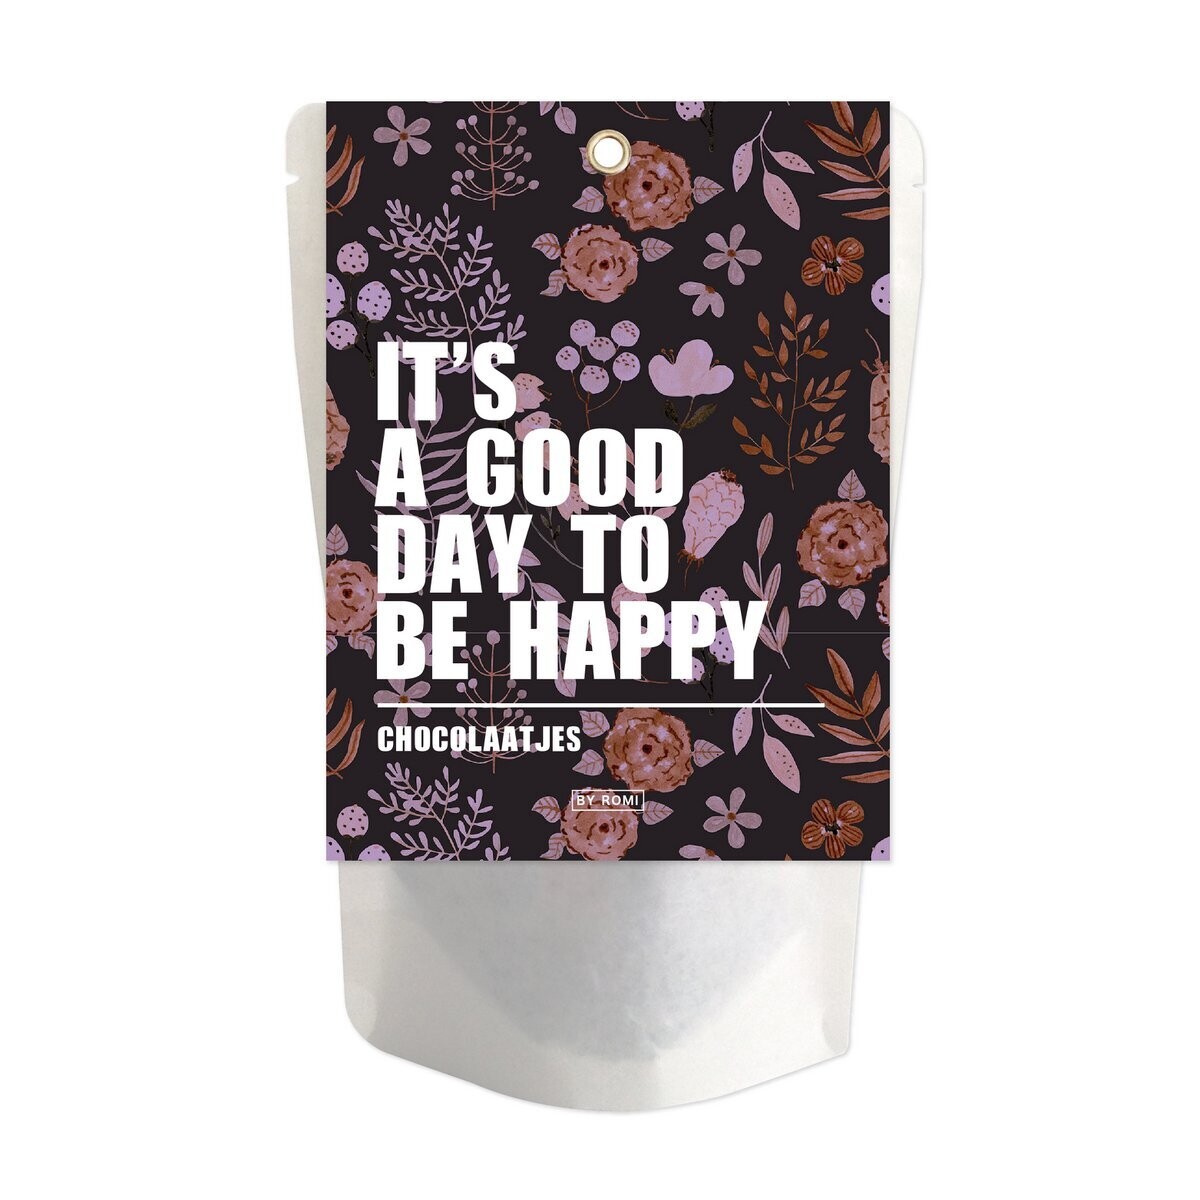 Chocolaatjes / It's a good day to be happy